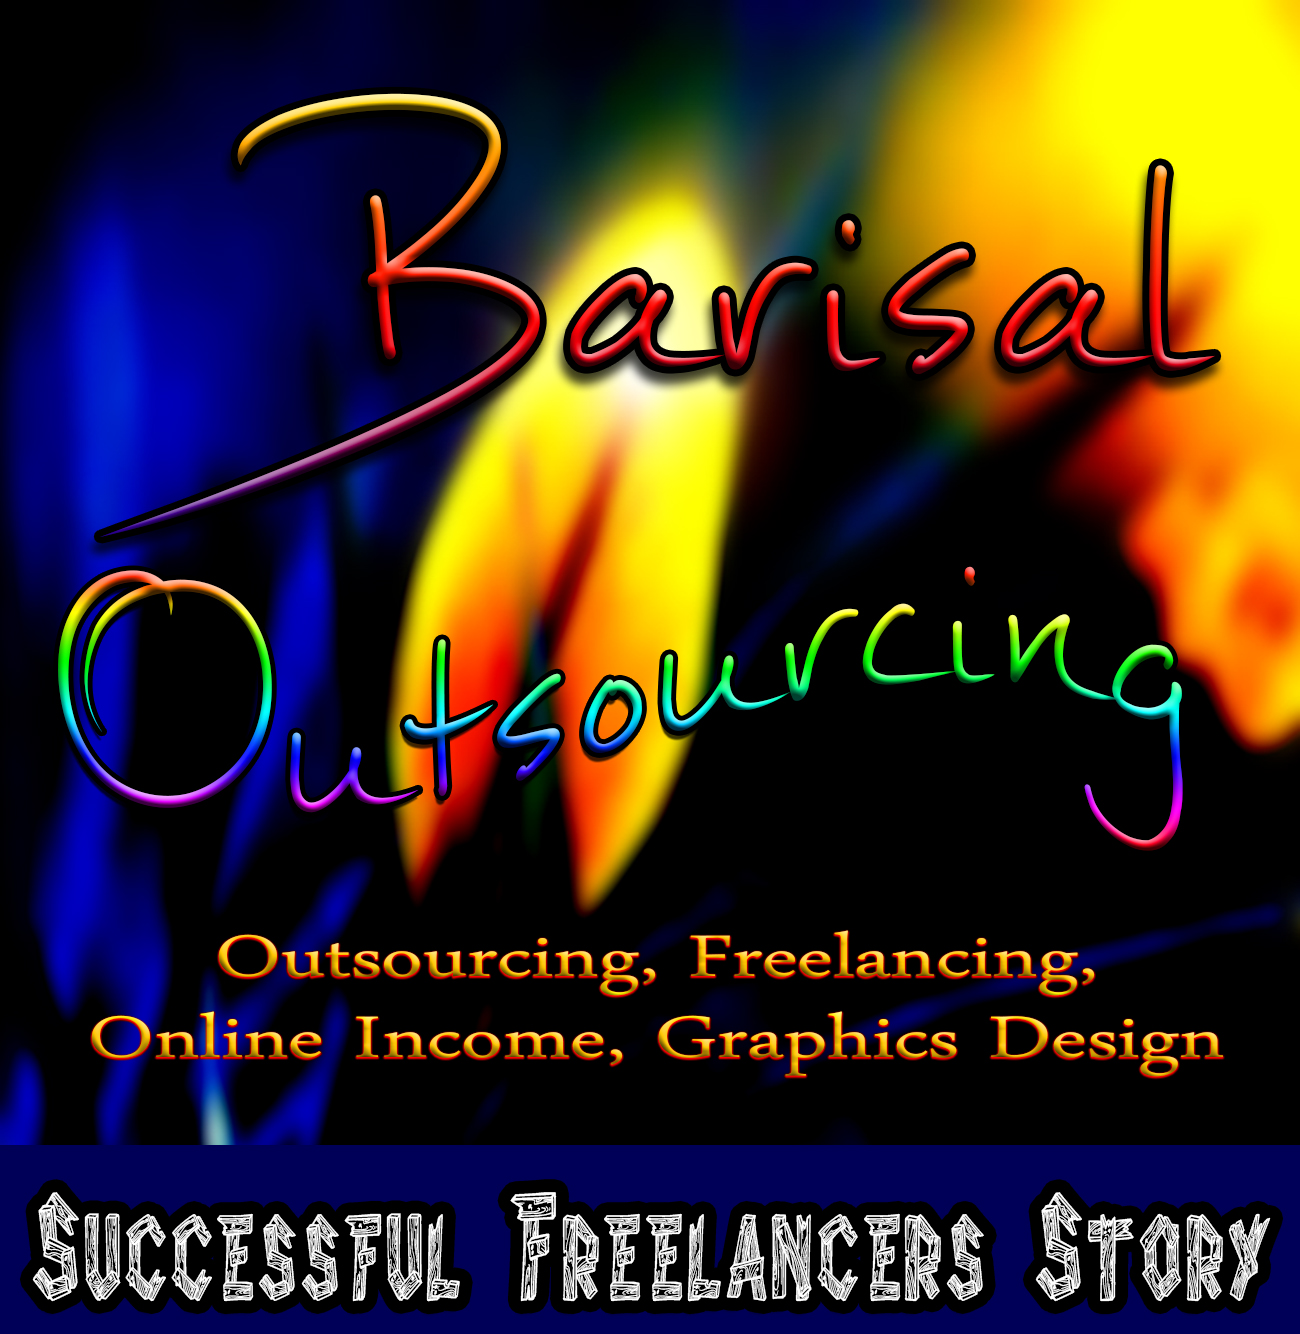 BARISAL OUTSOURCING PAGE